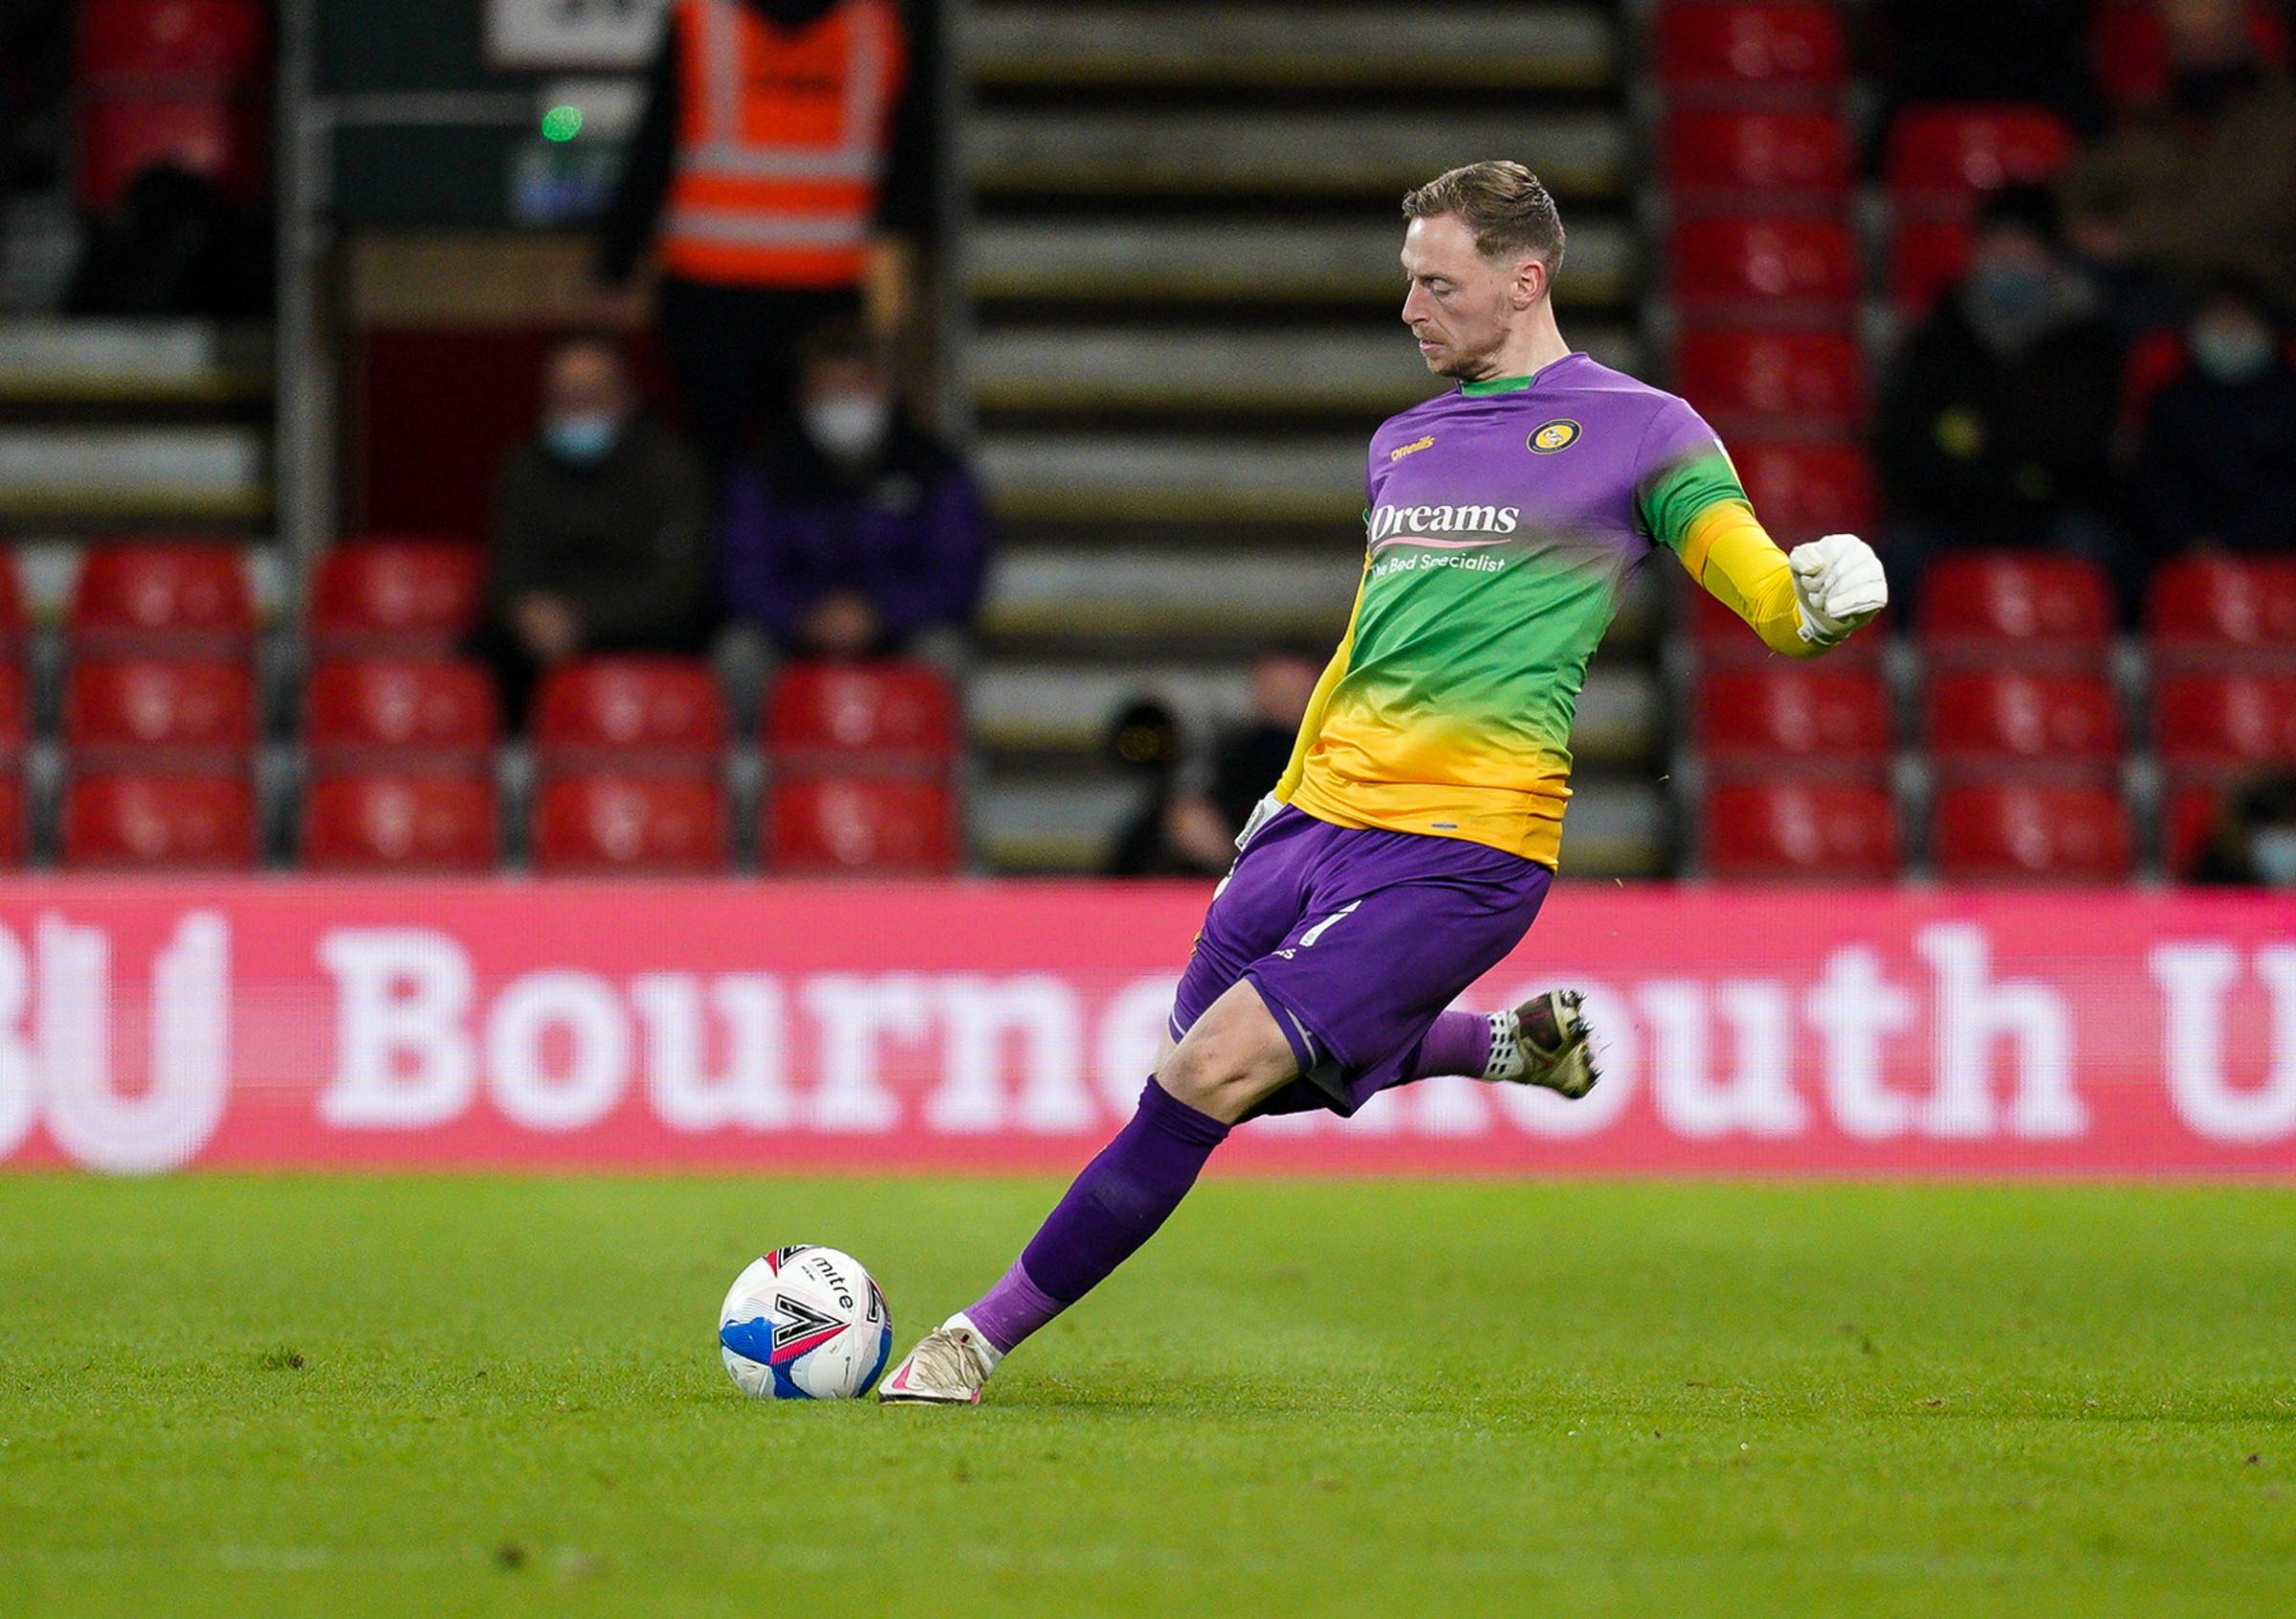 Ryan Allsop spent five years with Bournemouth between 2013 and 2018, playing 27 times. Two of those matches were in the Premier League (Prime Media)